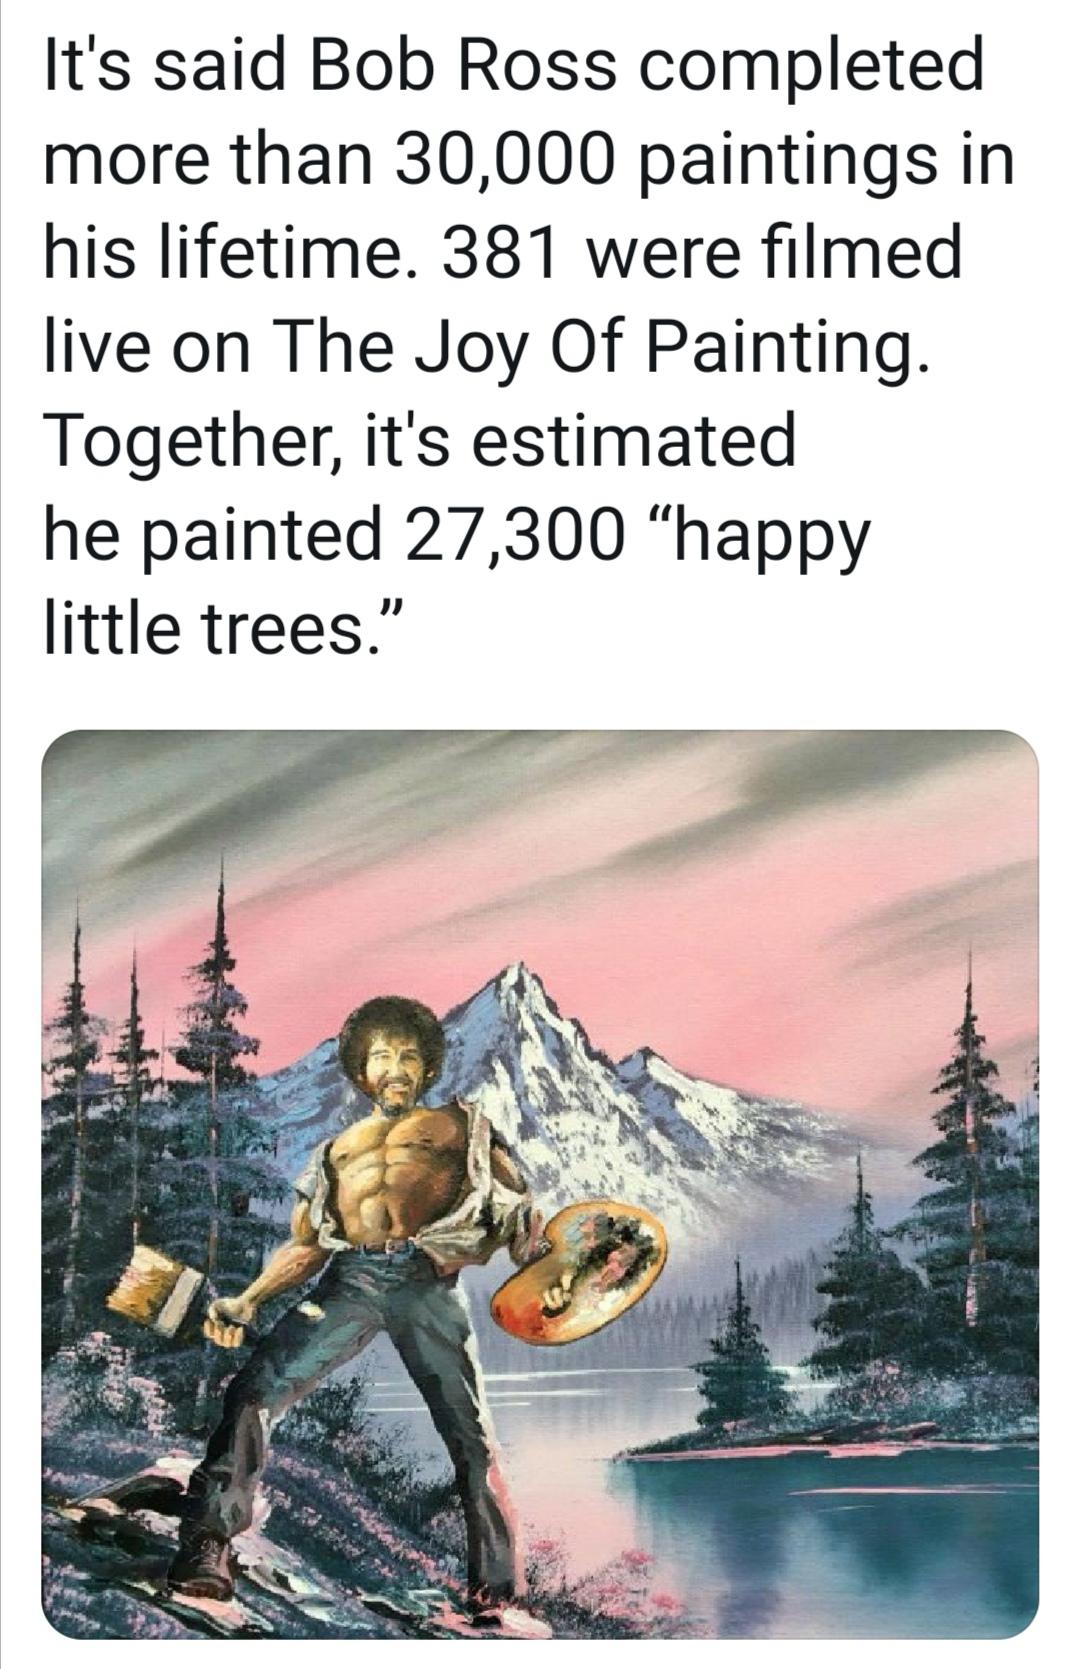 Bob Ross donated a lot of trees...